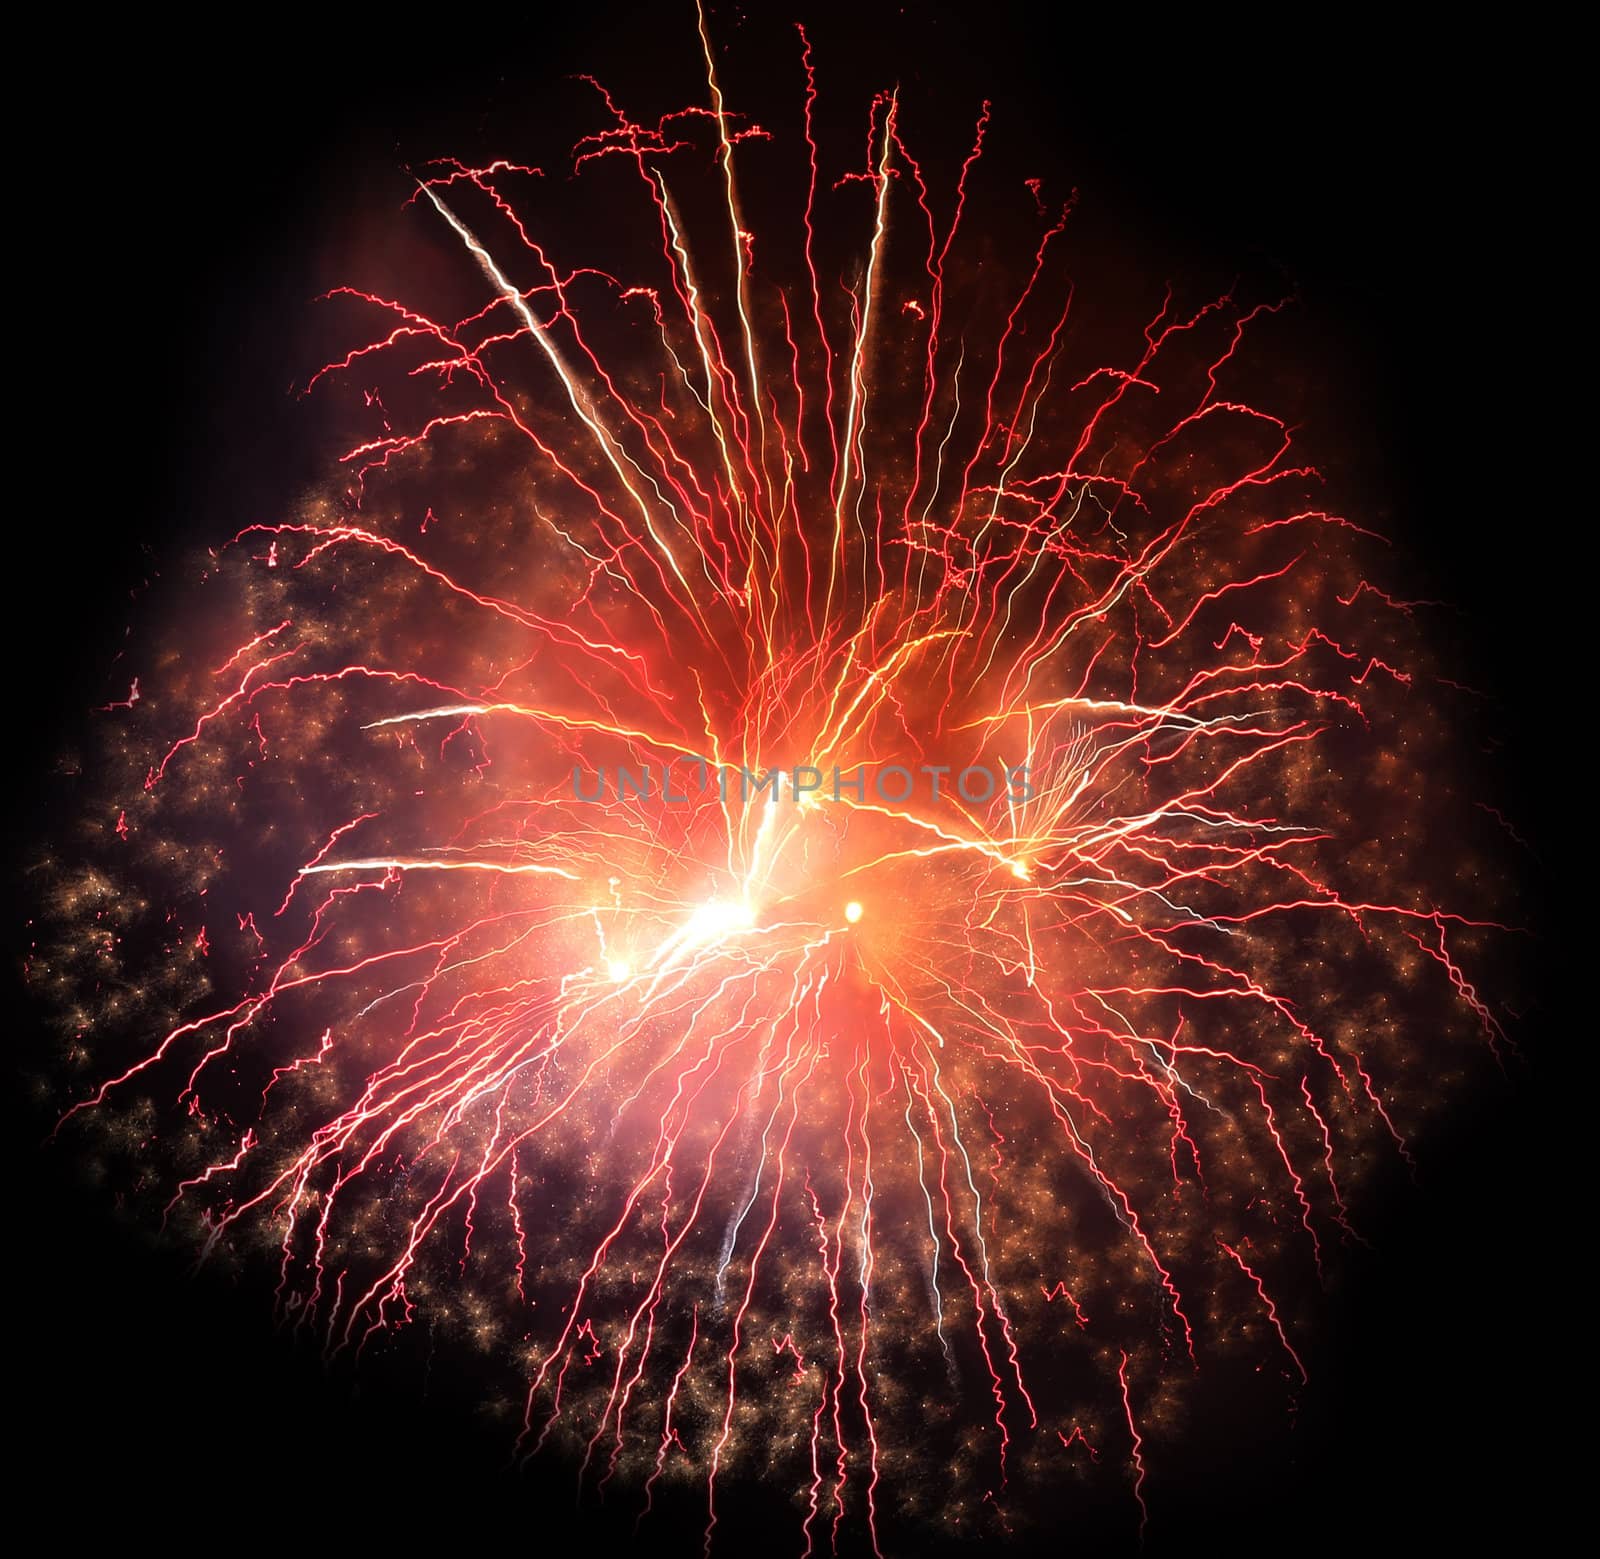 Fireworks by nwp